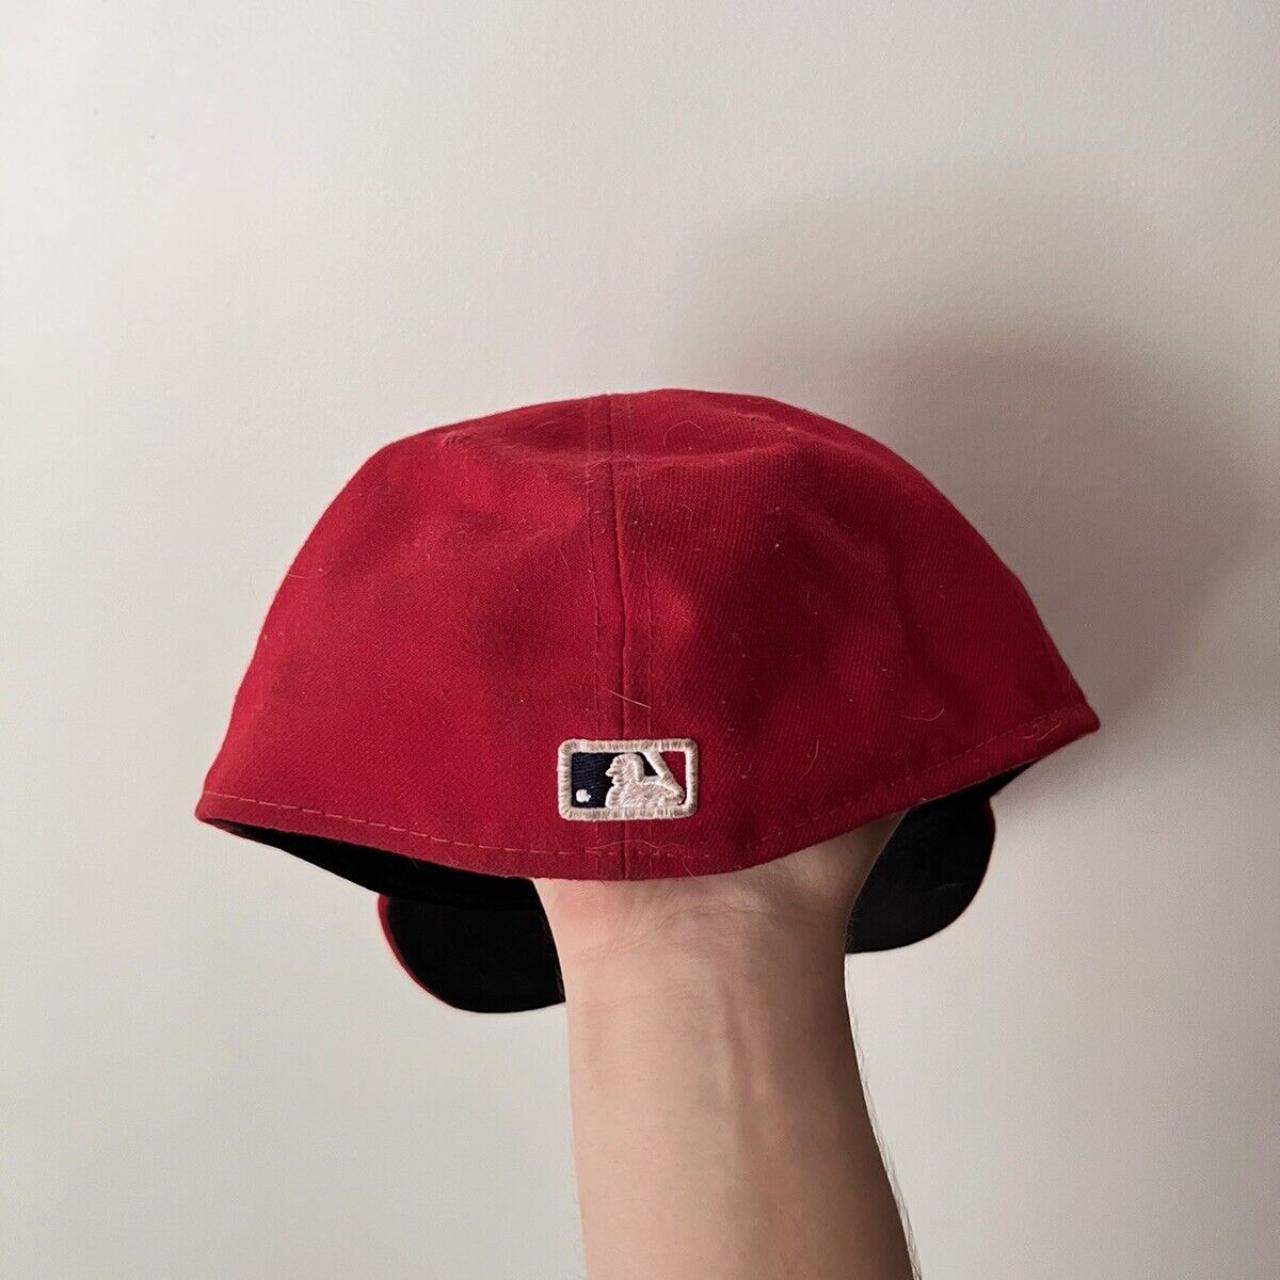 Two Toned Phillies Fitted Hat 7 3/8 Custom made - Depop